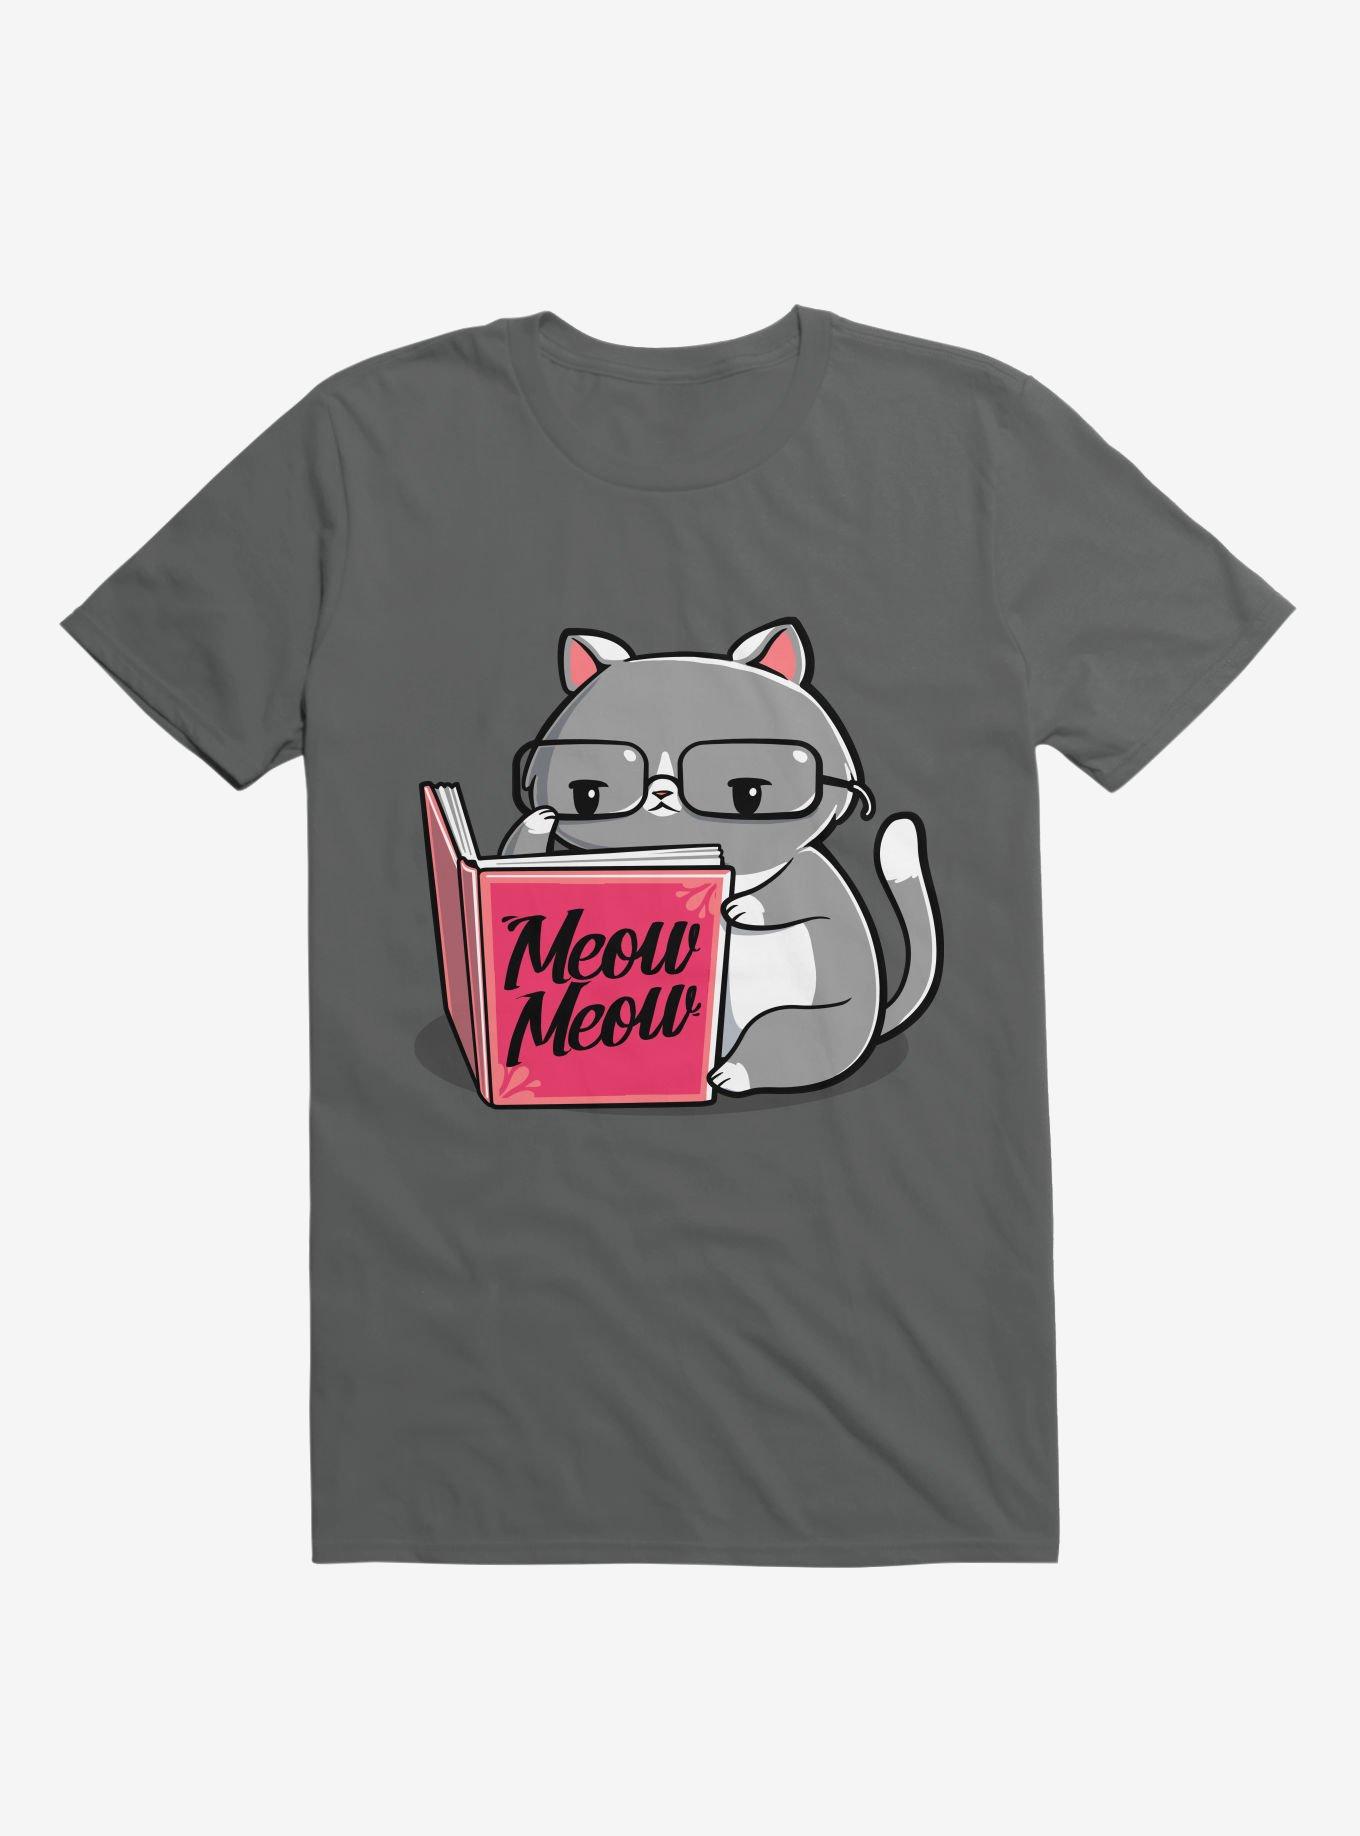 Books For Cats Meow Meow Book Charcoal Grey T-Shirt, CHARCOAL, hi-res